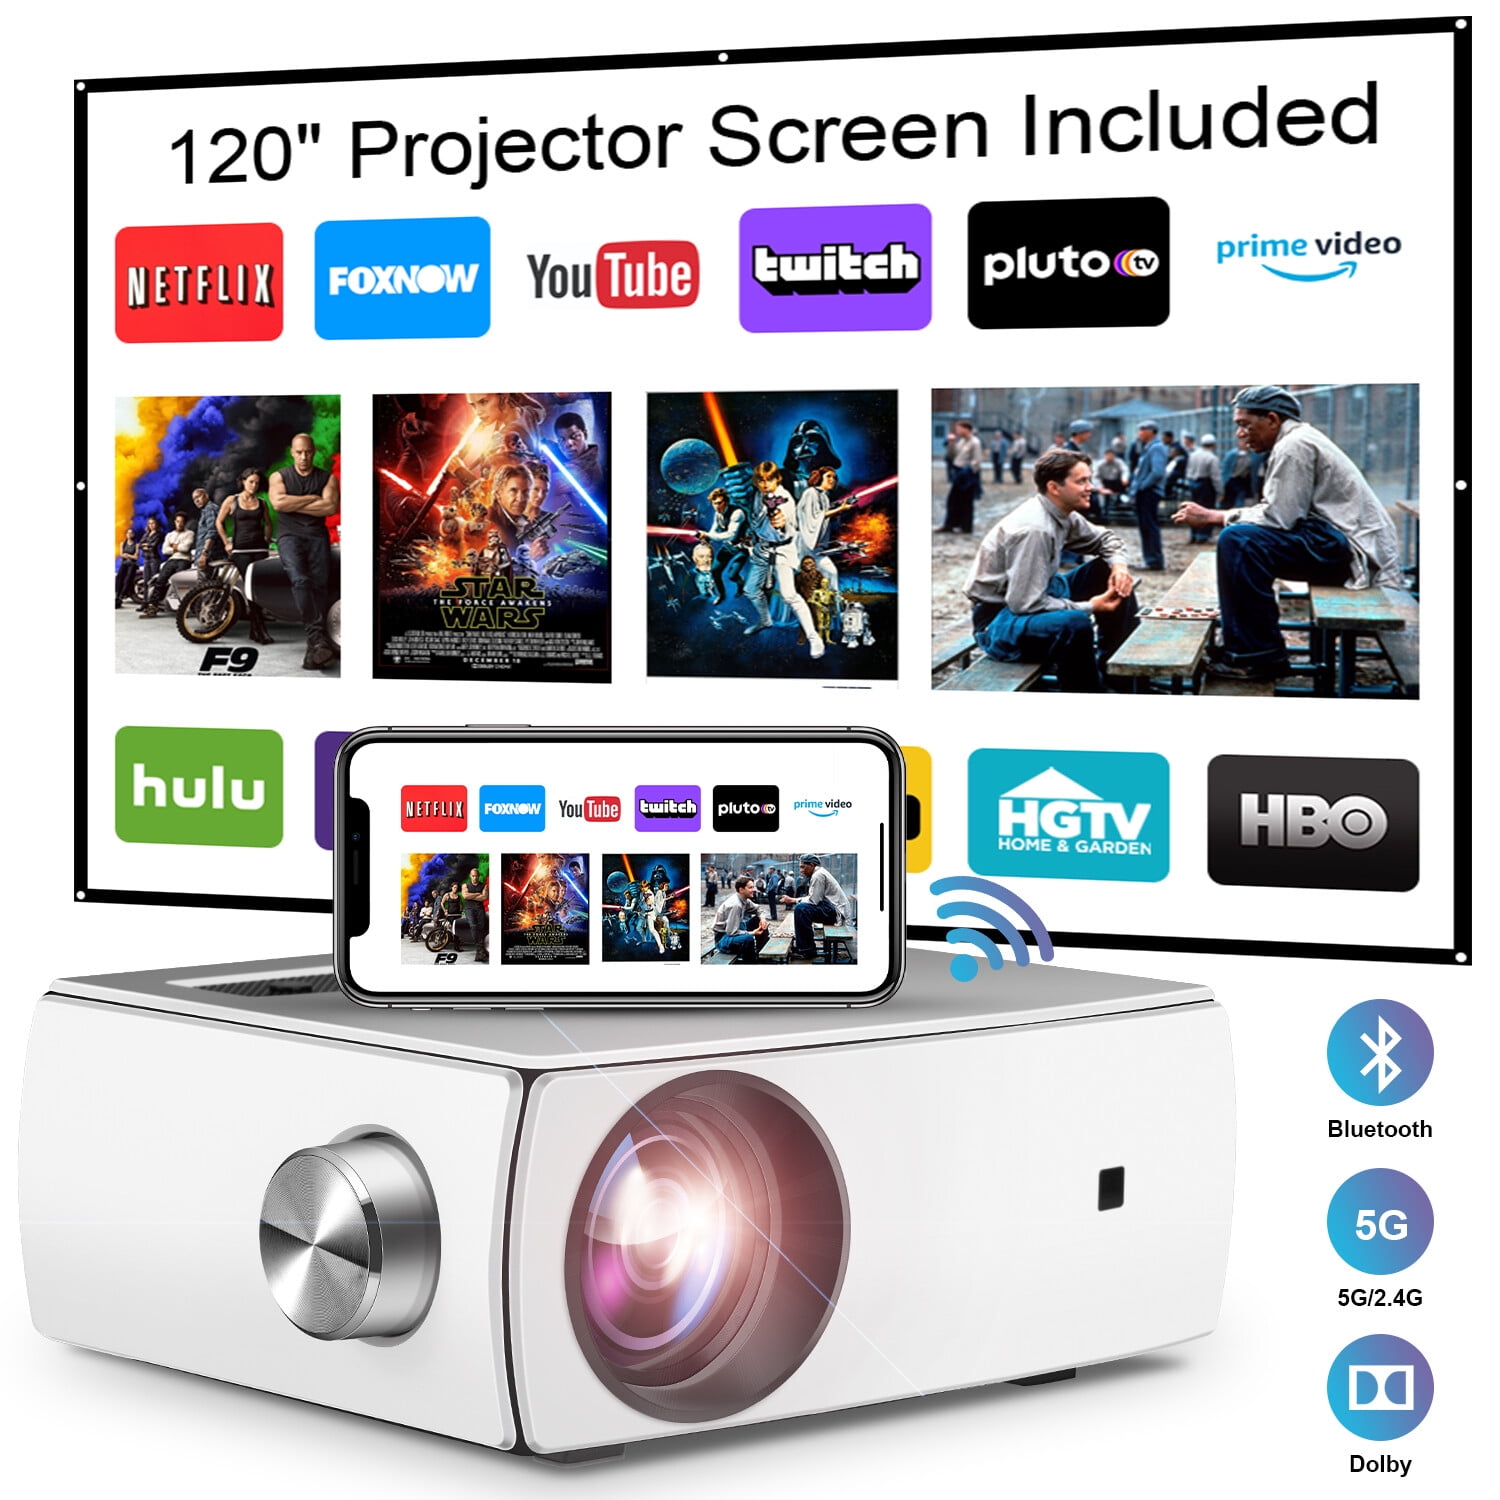 5G WiFi Projector 4K Supported ACROJOY 9500 Lumens Full HD Native 1080P Projector with 120'' Screen Home Movie Projector w/ 300'' Display Outdoor Video Projector with HDMI for TV Stick/iOS/Android 